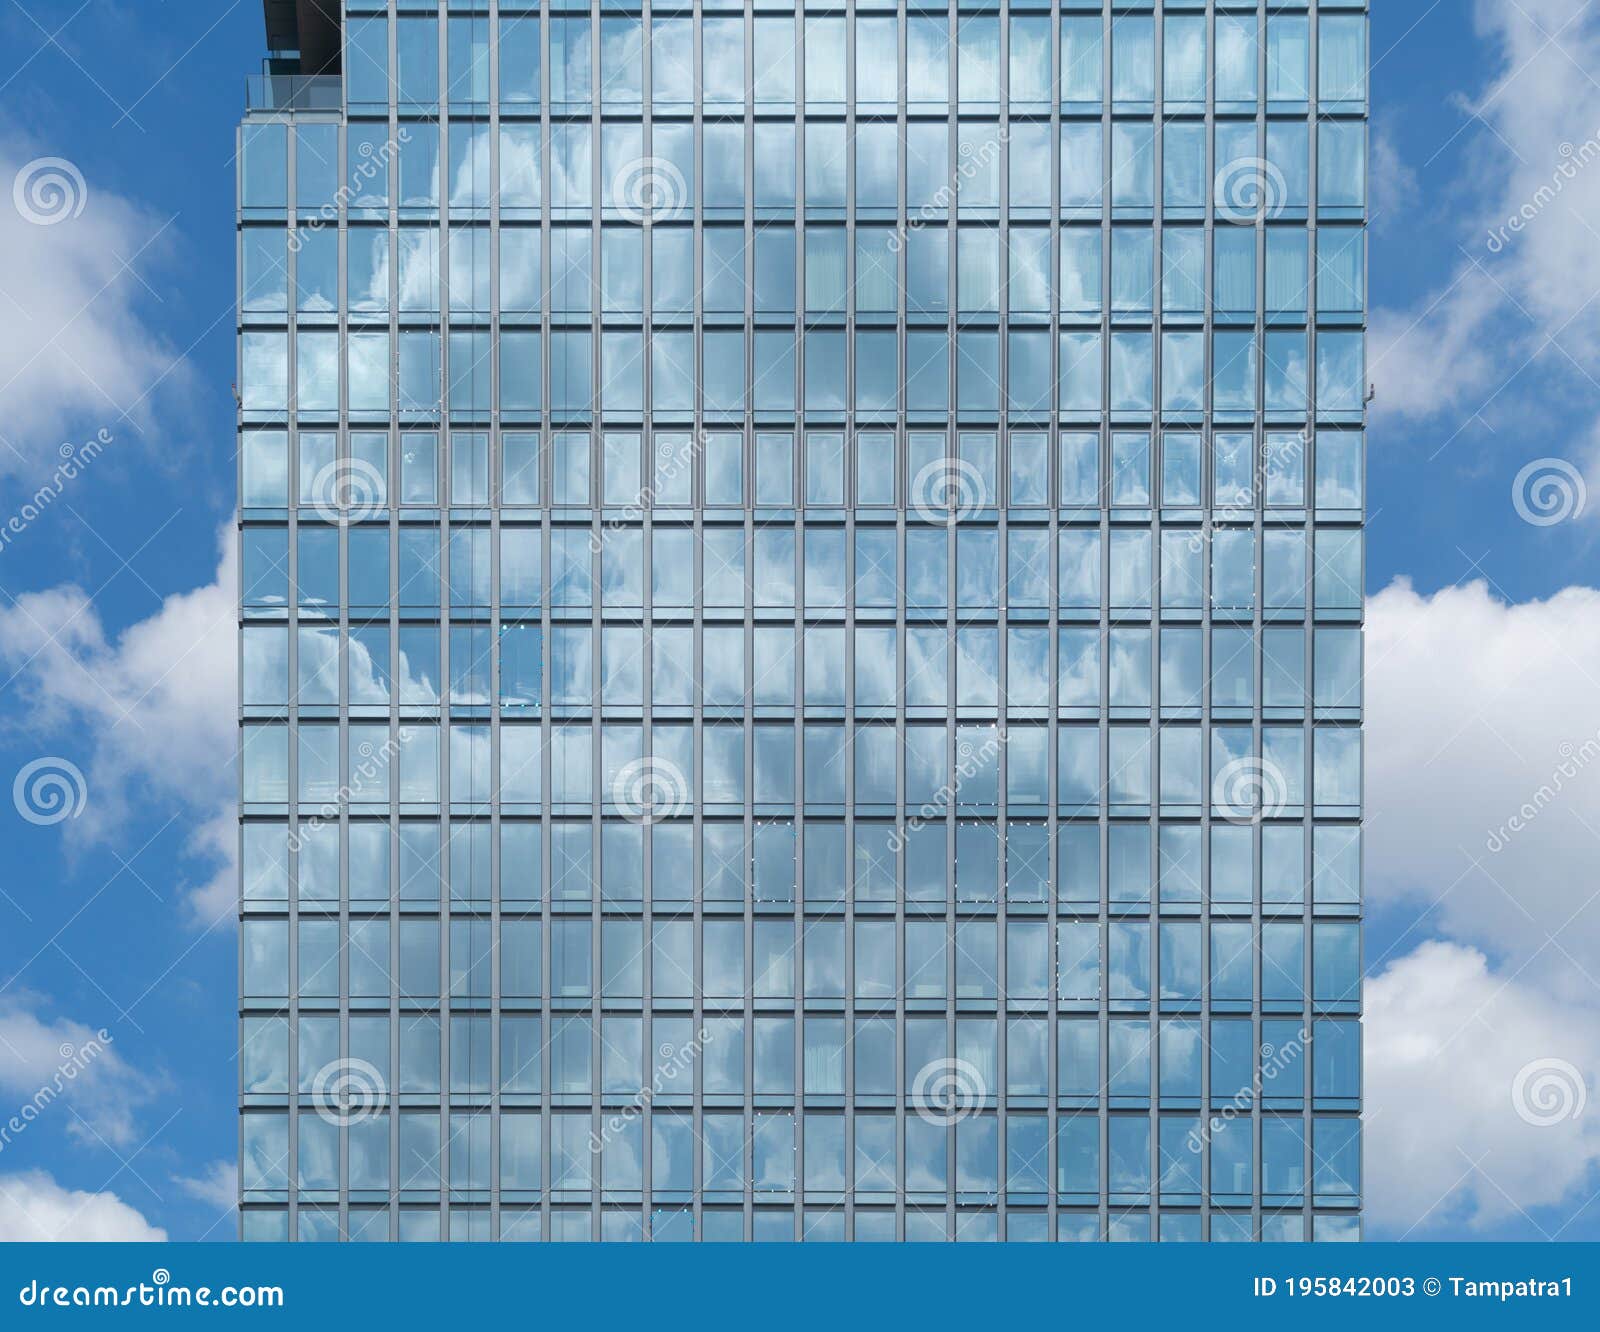 Pattern of Office Buildings Windows. Glass Architecture Facade Design with  Reflection in Urban City, Downtown Bangkok Stock Image - Image of  background, downtown: 195842003